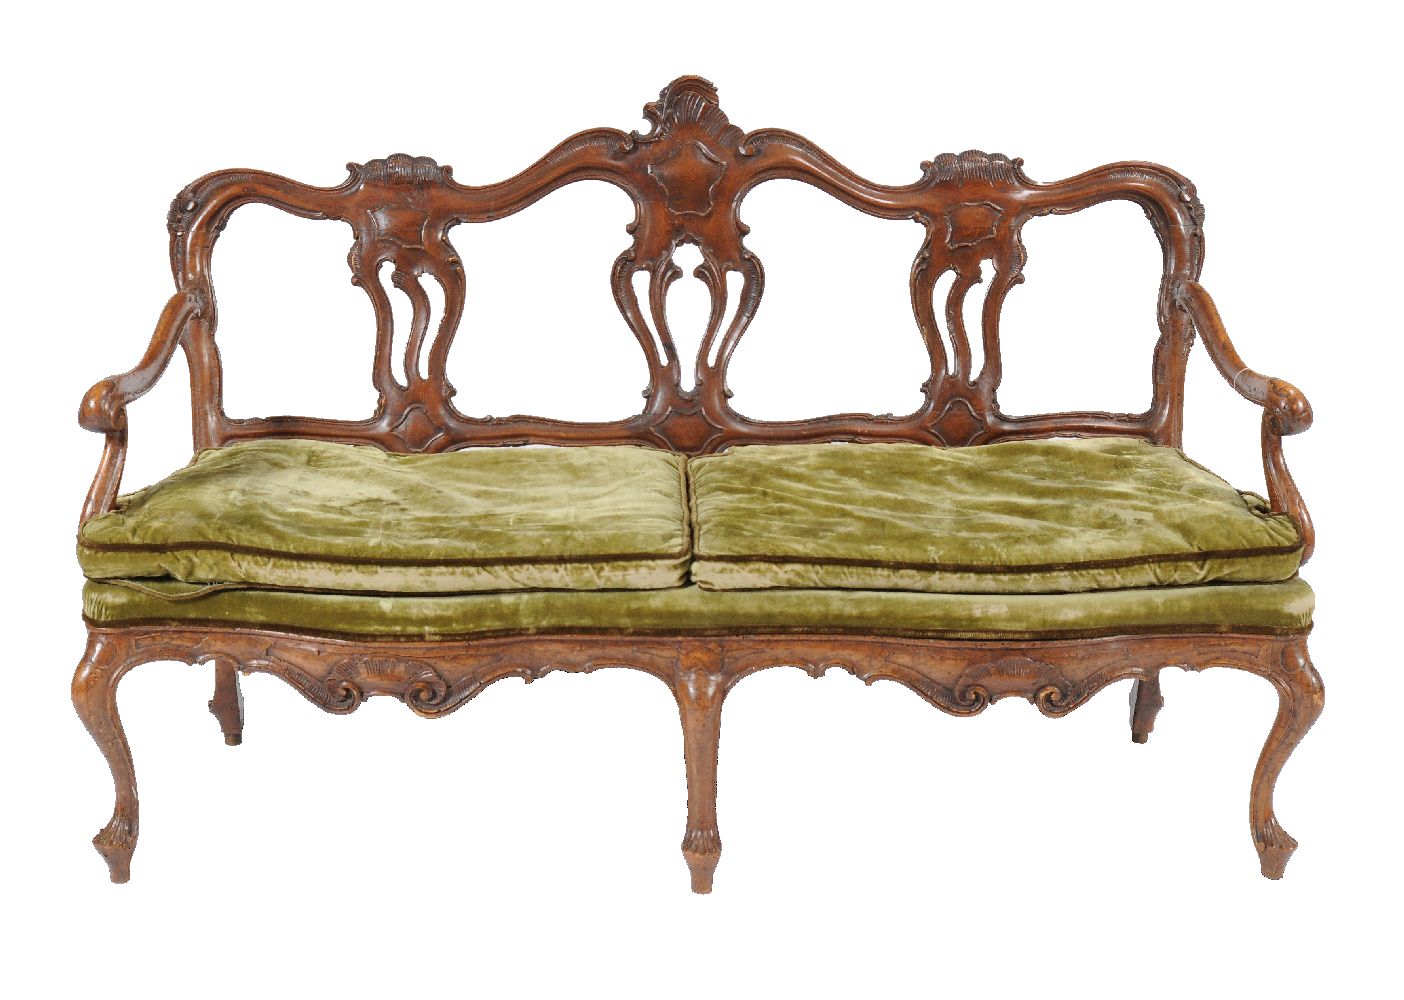 An Italian carved walnut chair back settee, mid 18th century, the carved and moulded back